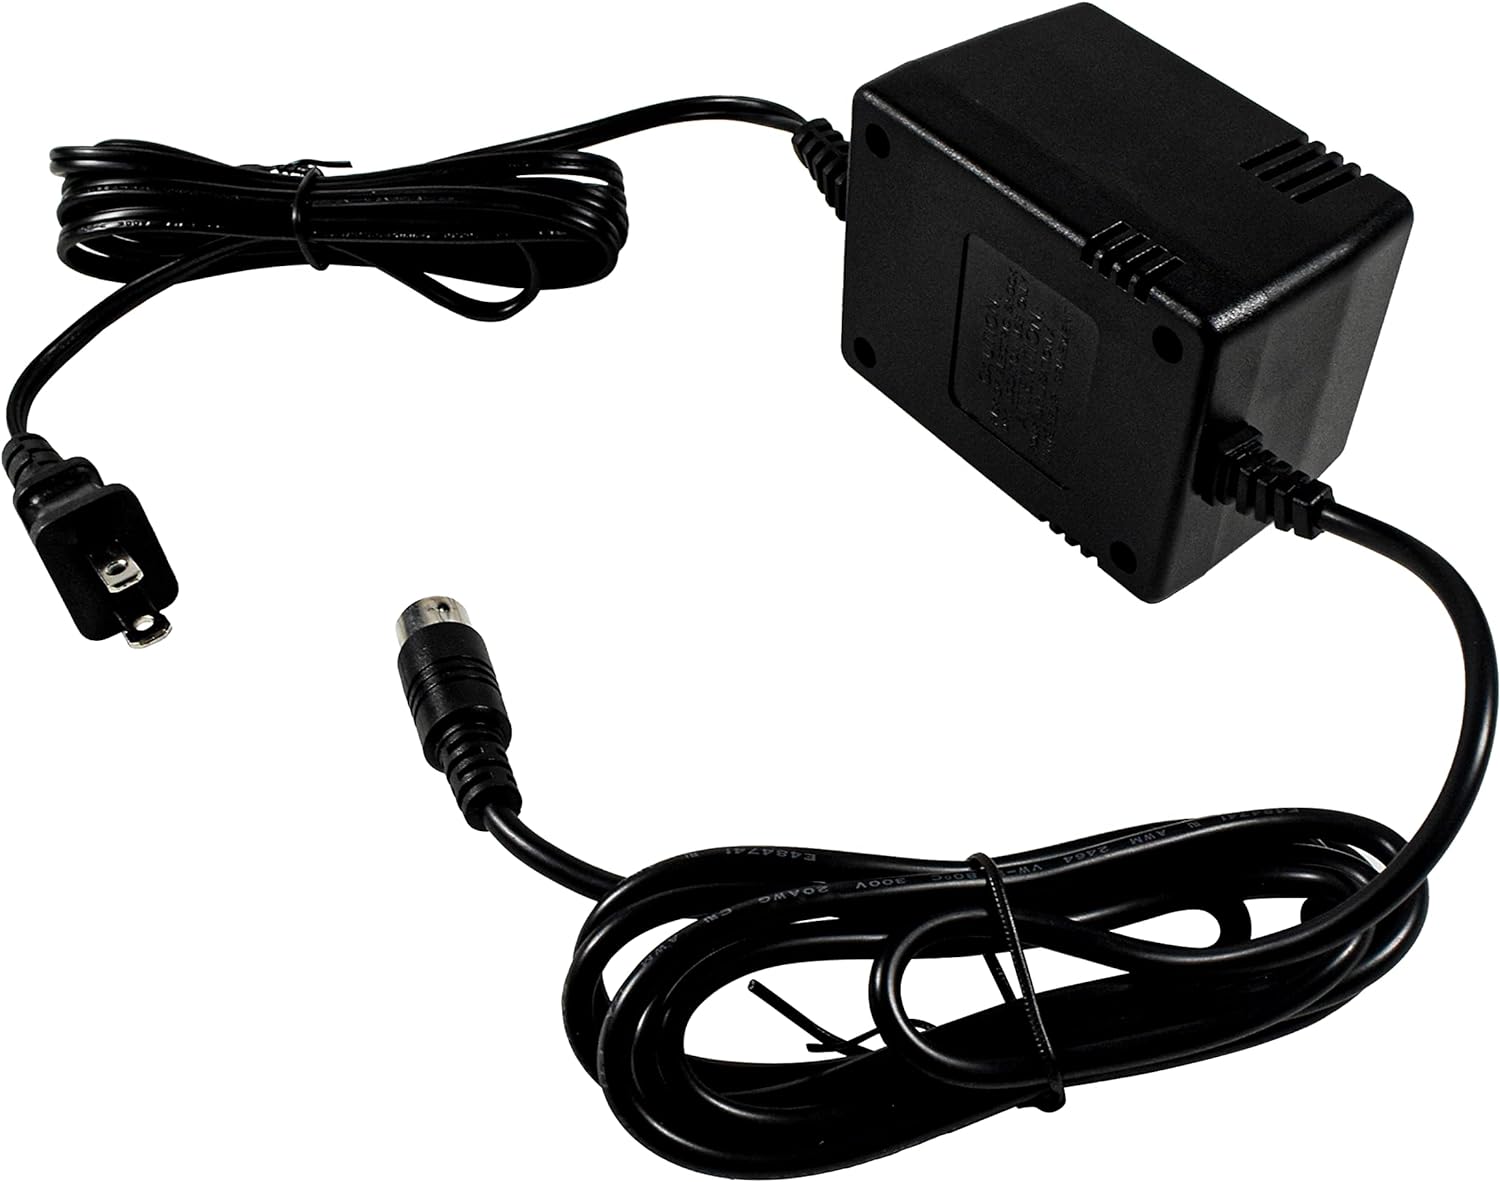 9V AC Adapter Compatible with Digitech PS0912 BP8 RP5 RP6 RP7 RP10 RP12 RP14D RP2000 RP20 RP21D, Studio Quad, Studio Qua